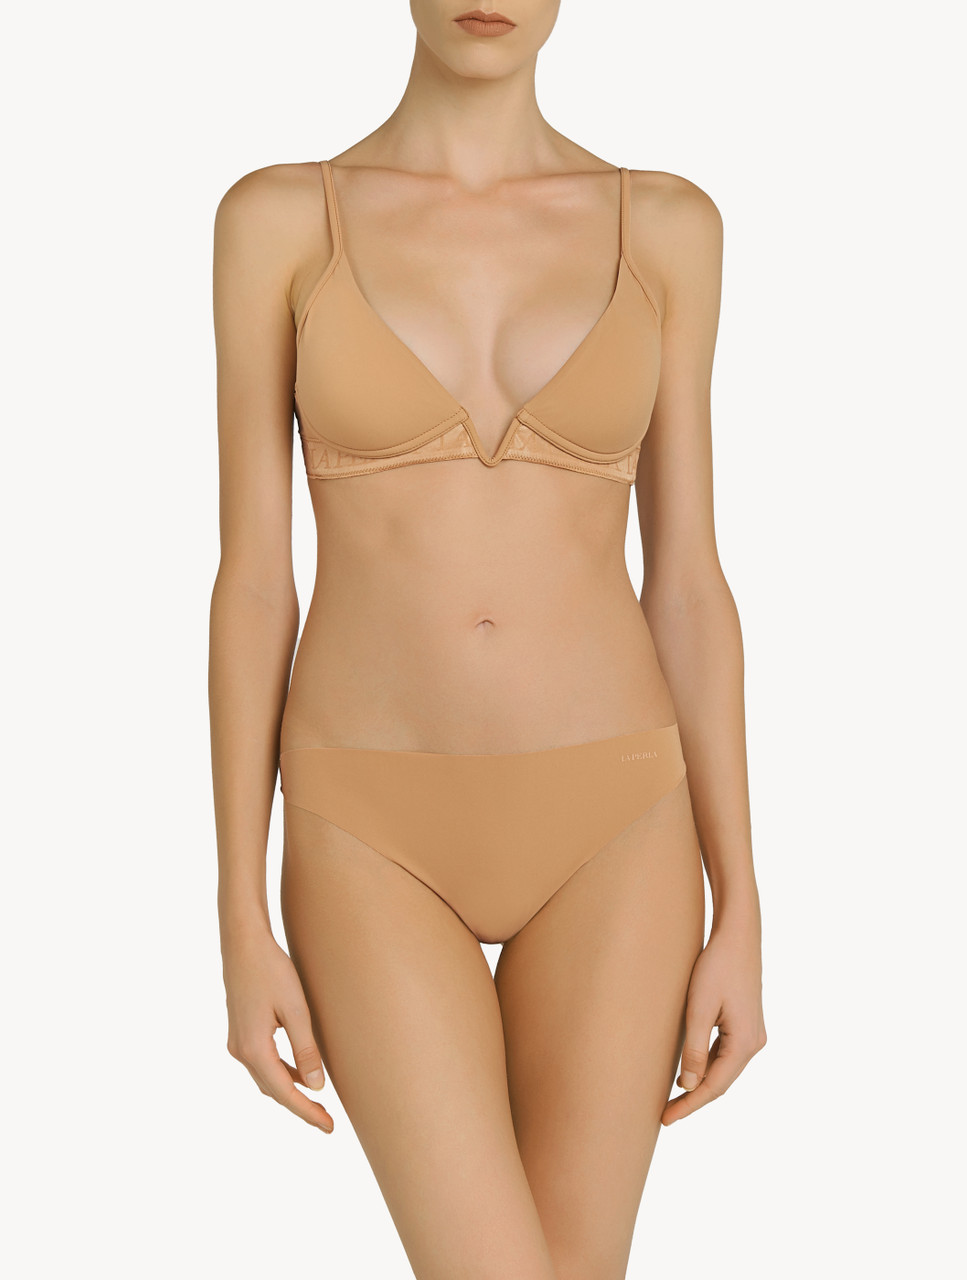 How To Find Your Perfect La Perla Bra Size